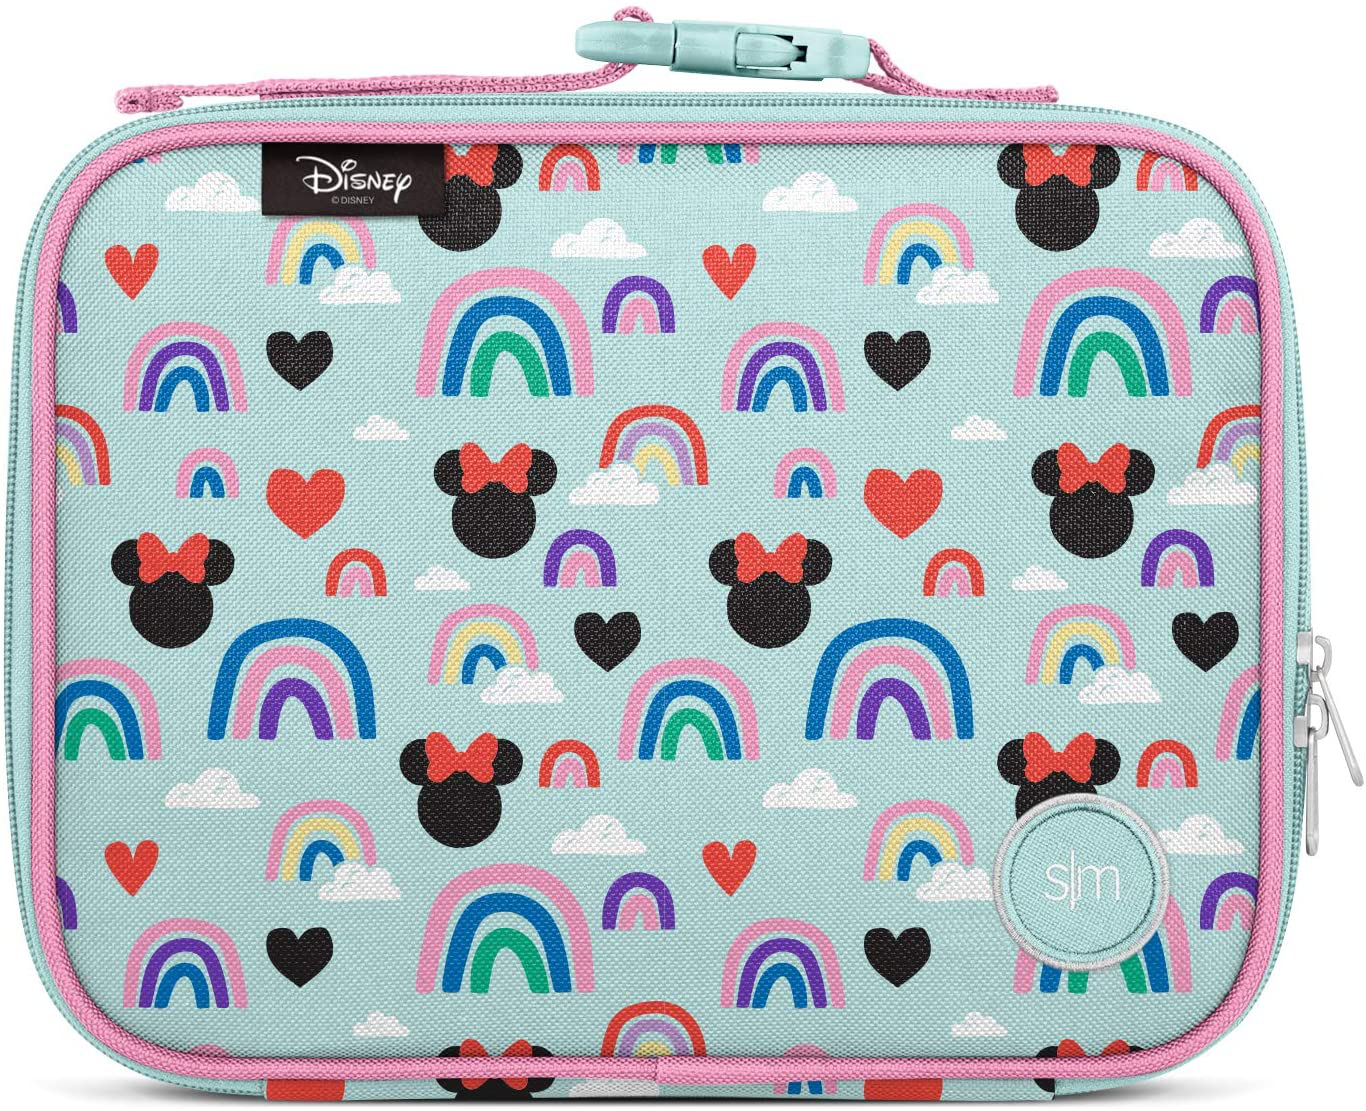 Simple Modern Kids Lunch Box-Insulated Reusable Meal Container Bag for Girls, Boys, Women, Men, Small Hadley, Solar System